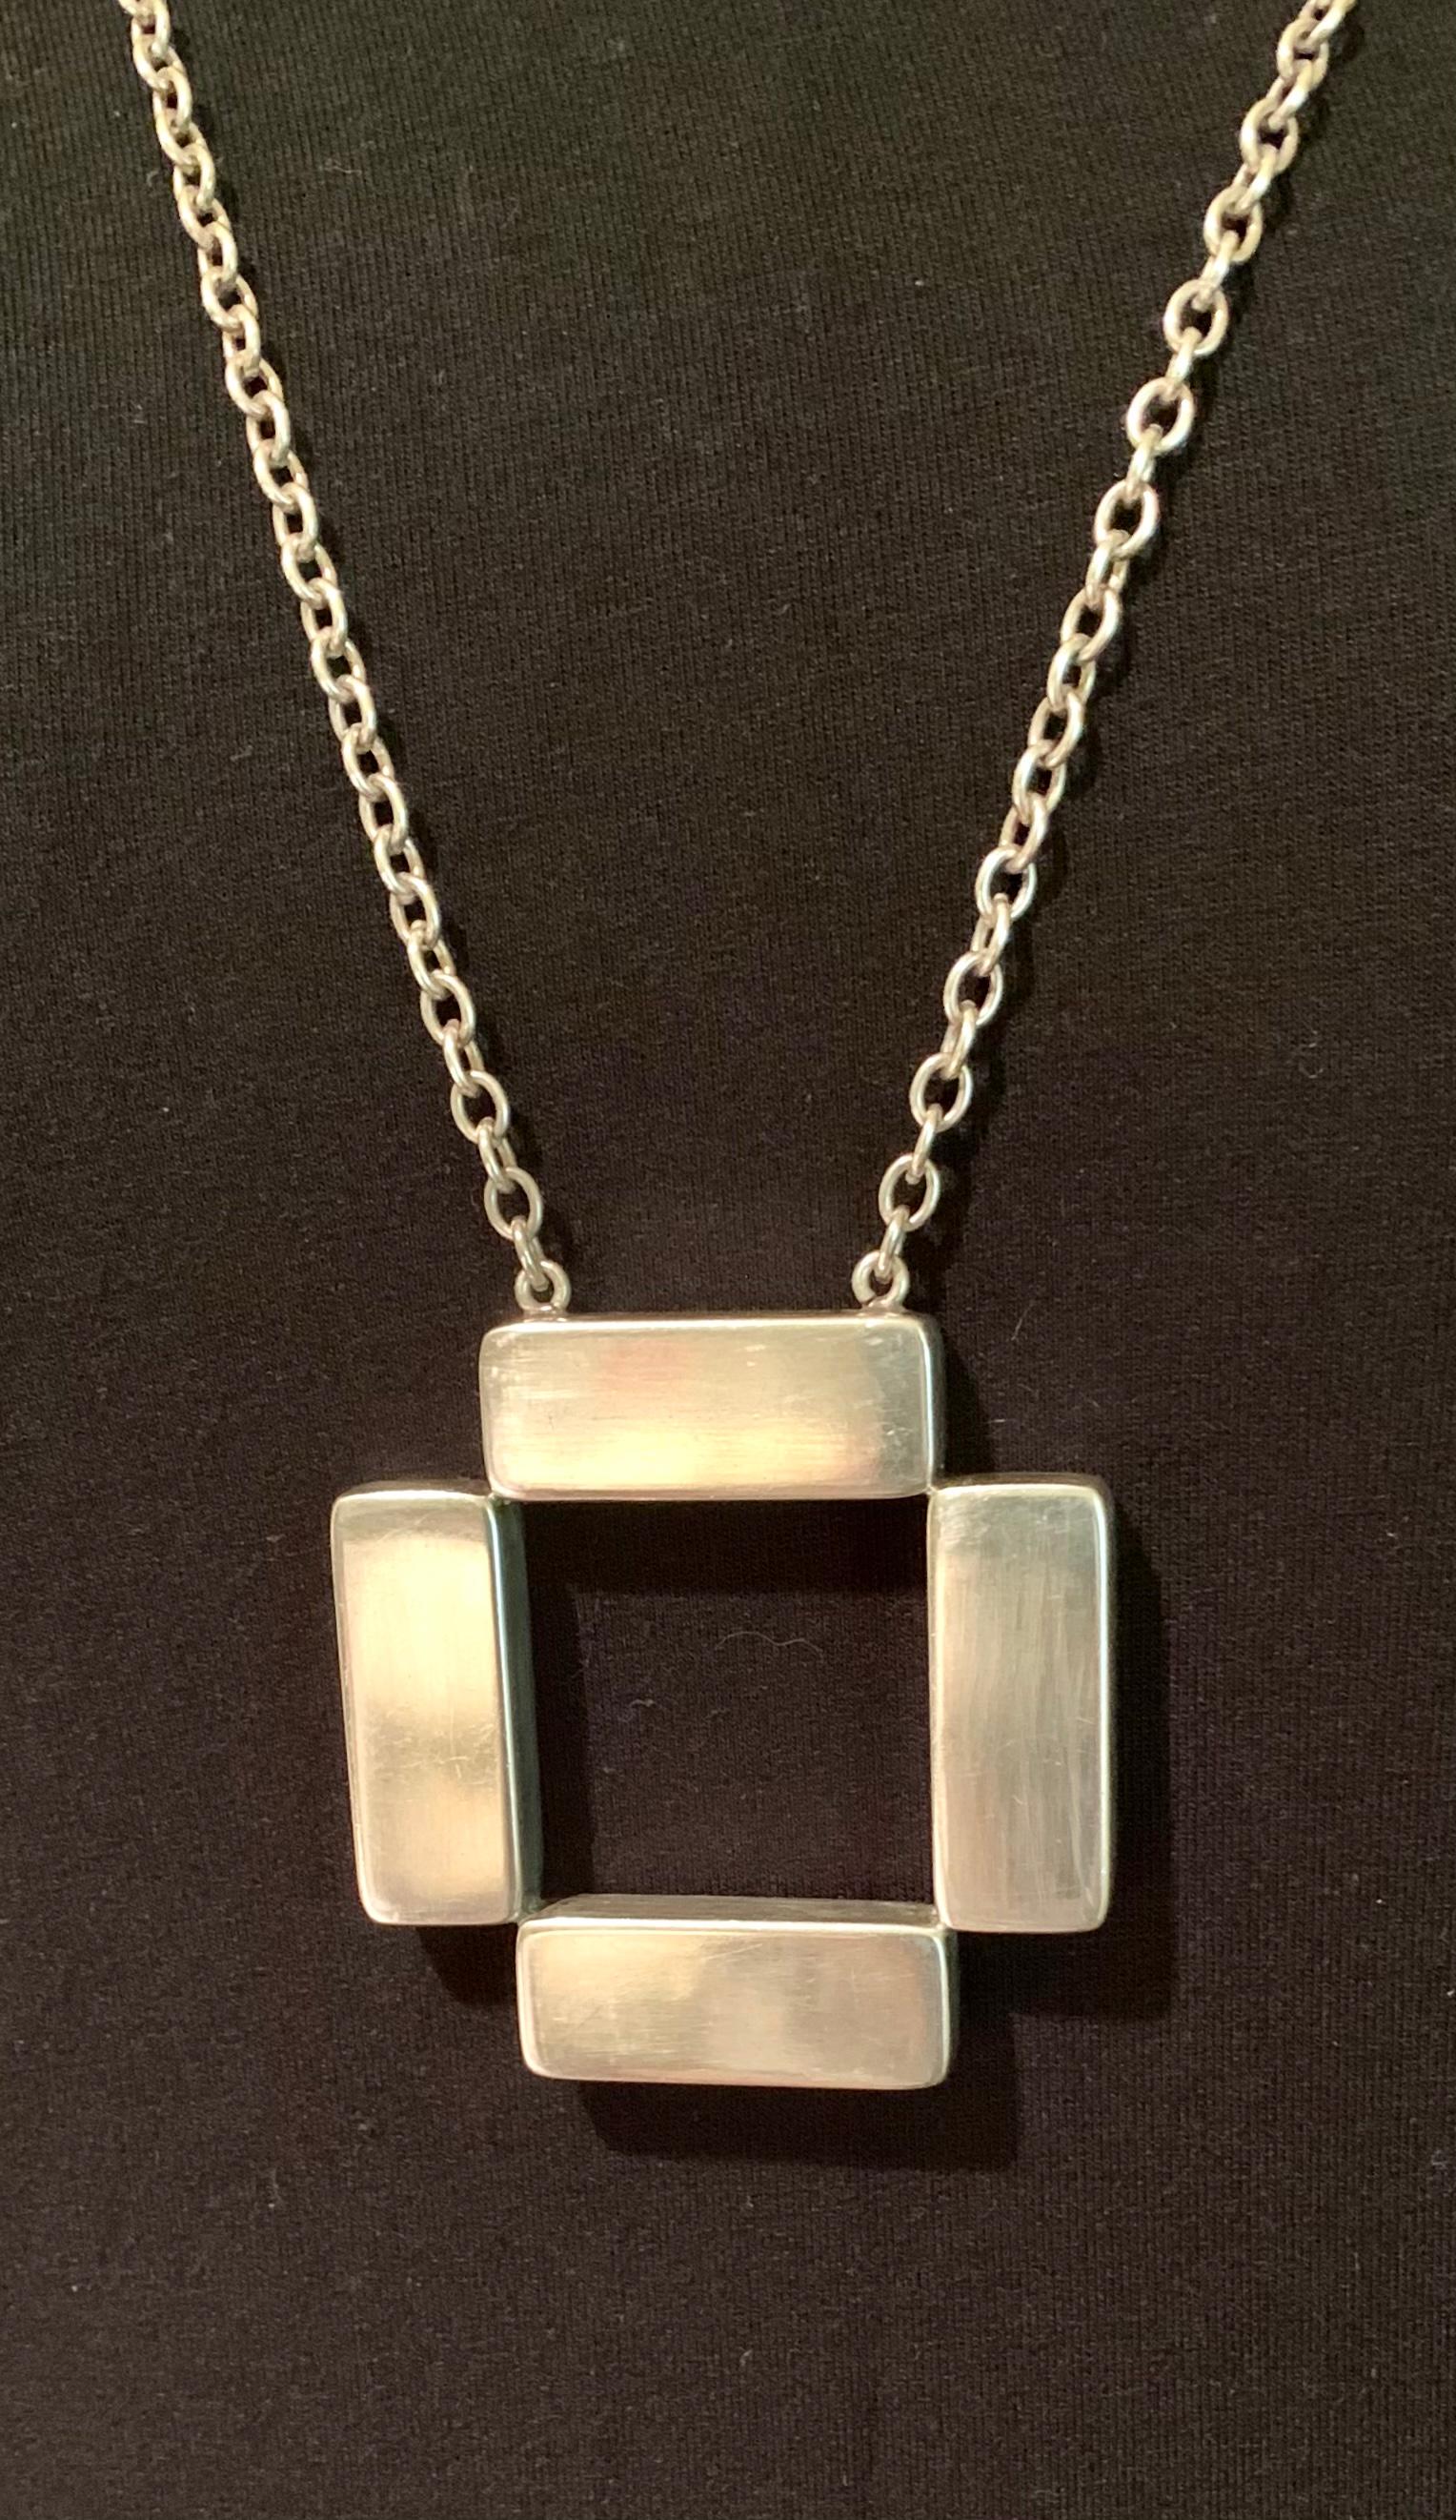 Scarce large 1970's Scandinavian Modernist sterling silver cross bars necklace by Astrid Fog for Georg Jensen.
Astrid Fog (1911-1993) designed her first jewelry collection for Georg Jensen in 1969. Her jewelry designs are distinctive for their large